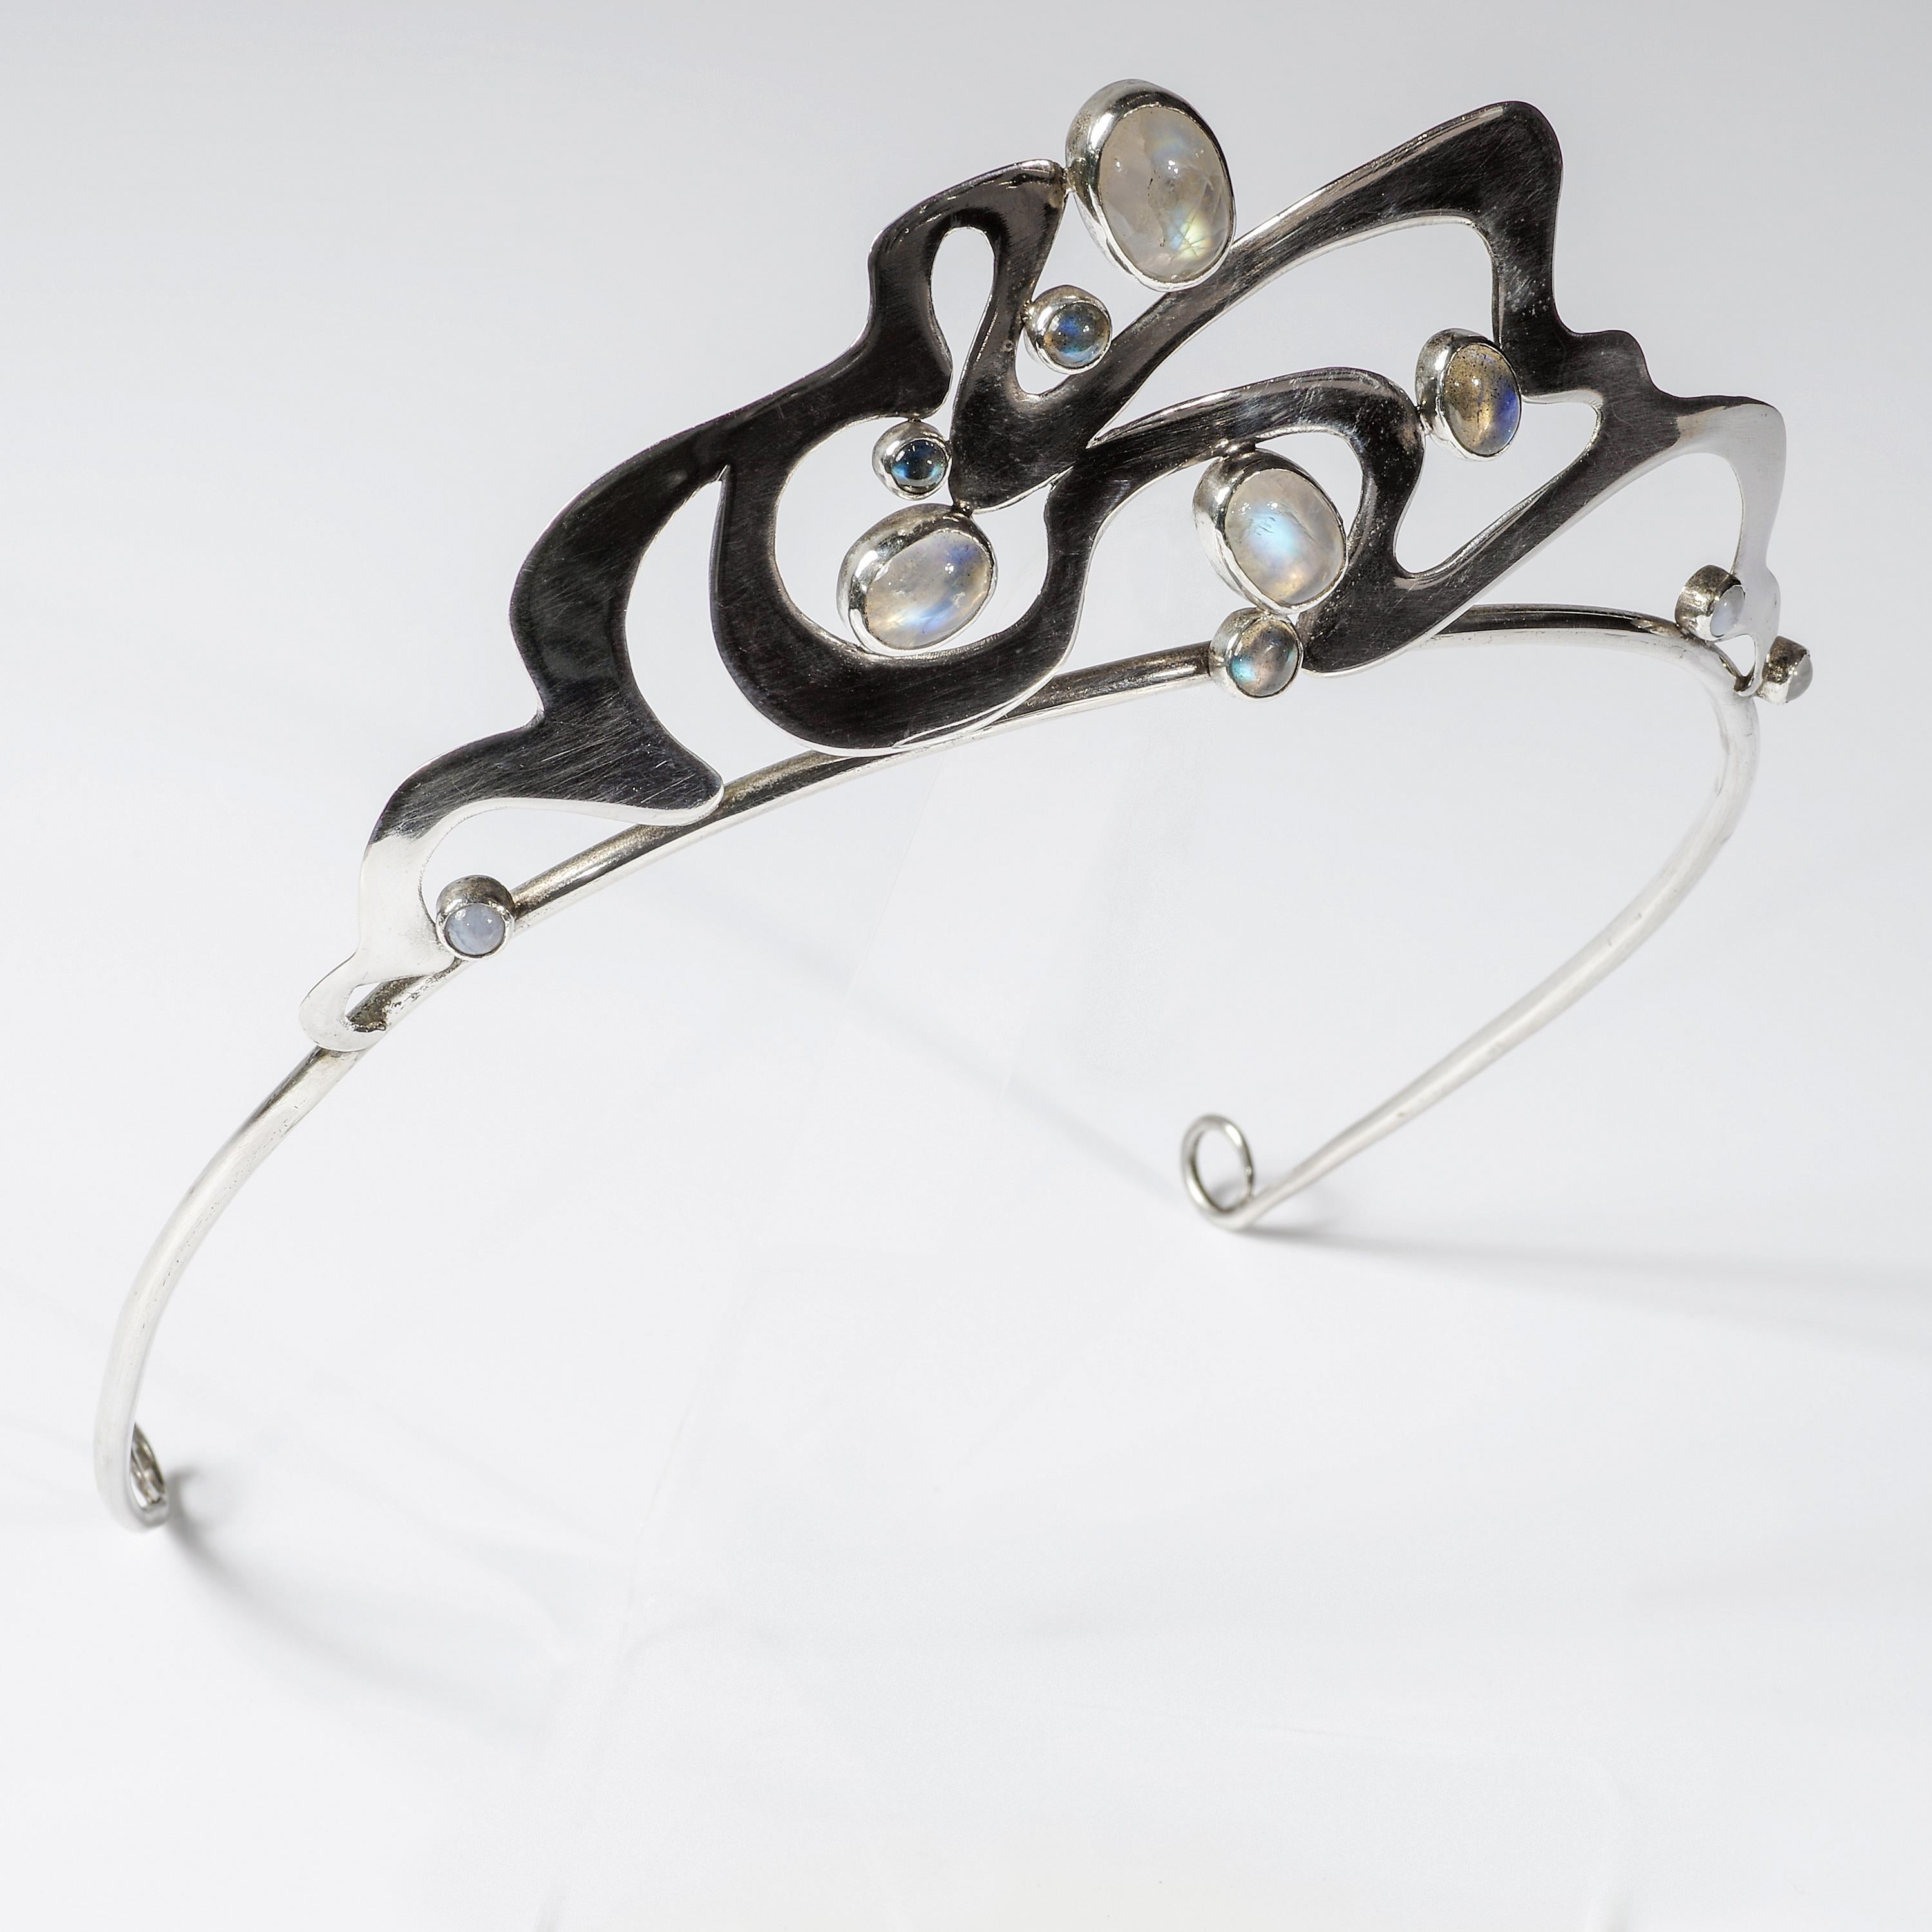 Stunning in every way and exceptionally rare, this beautifully hand-crafted tiara from the Art Nouveau-era (circa 1910) is composed of a simple, elegantly tapered wire band for positioning the piece atop the head and a swirling geometric silver